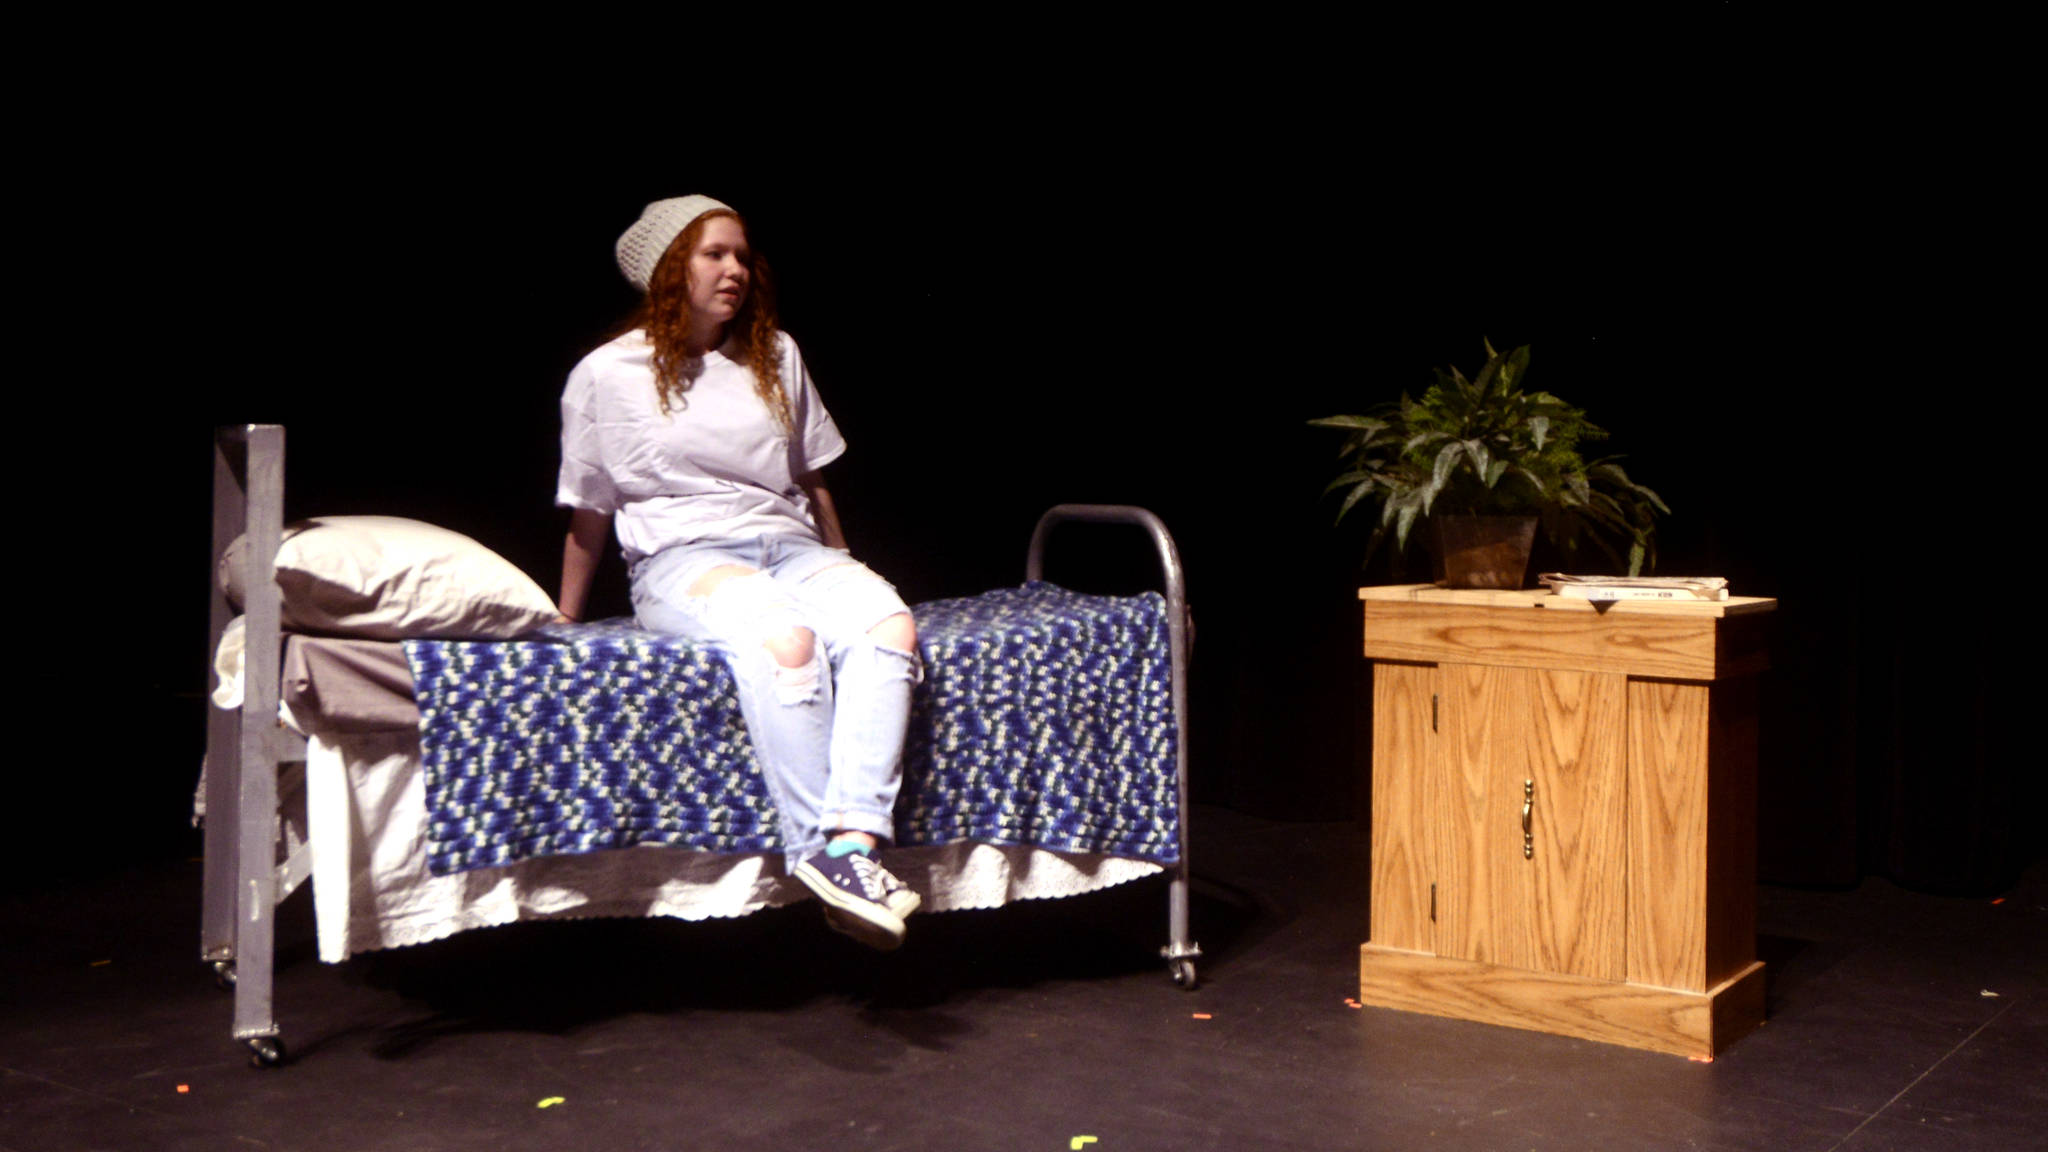 Tehya Nichols performs on stage in the one-act play “HDYMTWBT,” written by Mike Druce, a former Soldotna High School teacher. (Kat Sorensen/Peninsula Clarion)